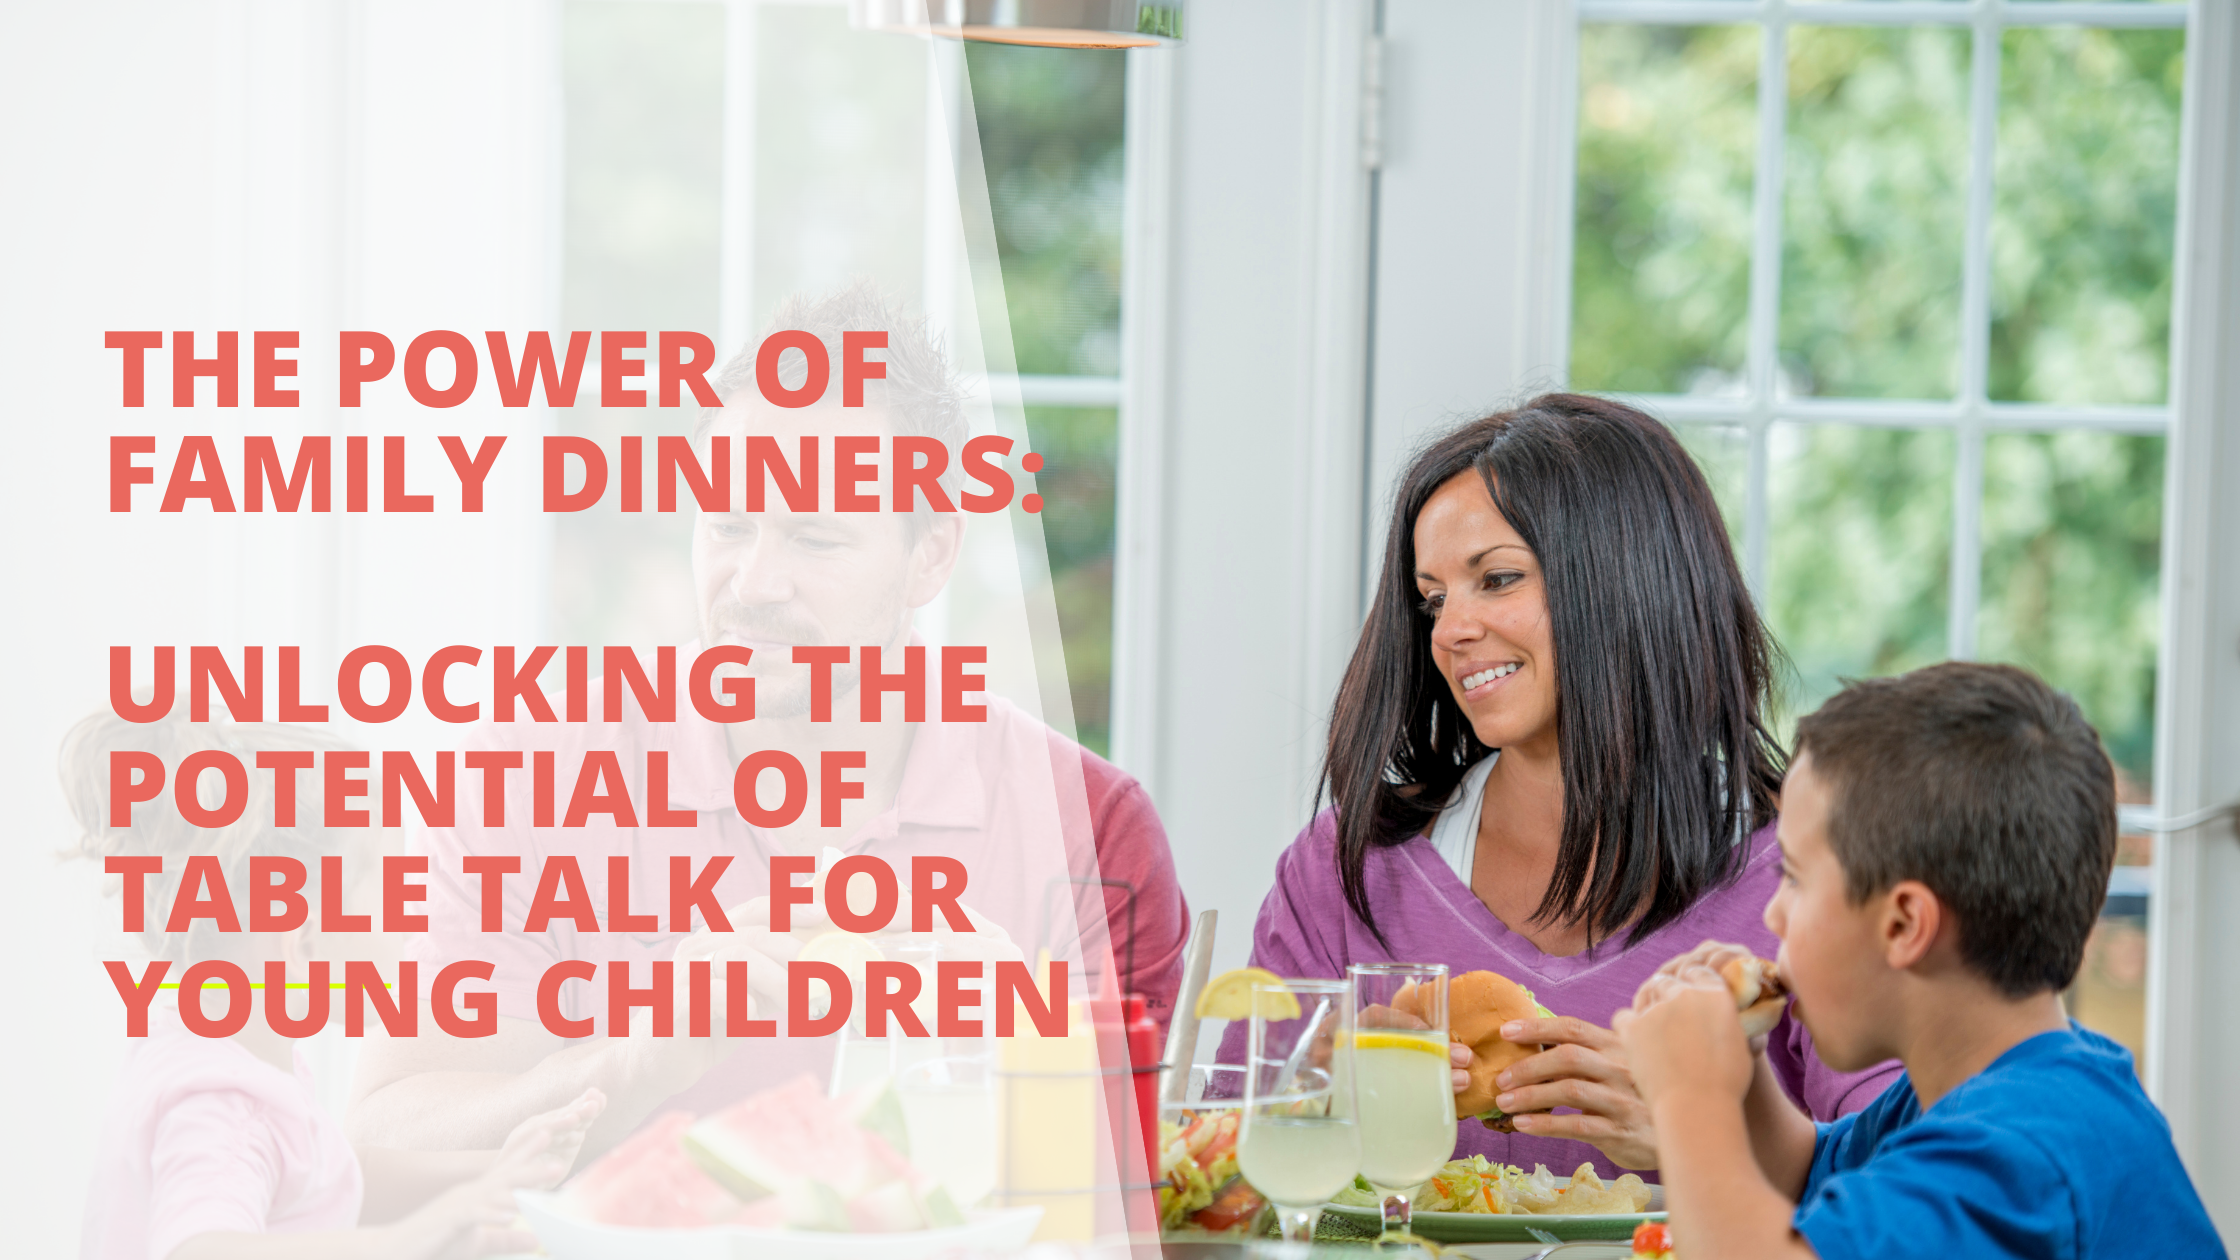 The power of family dinners: Unlocking the potential of table talk for young children